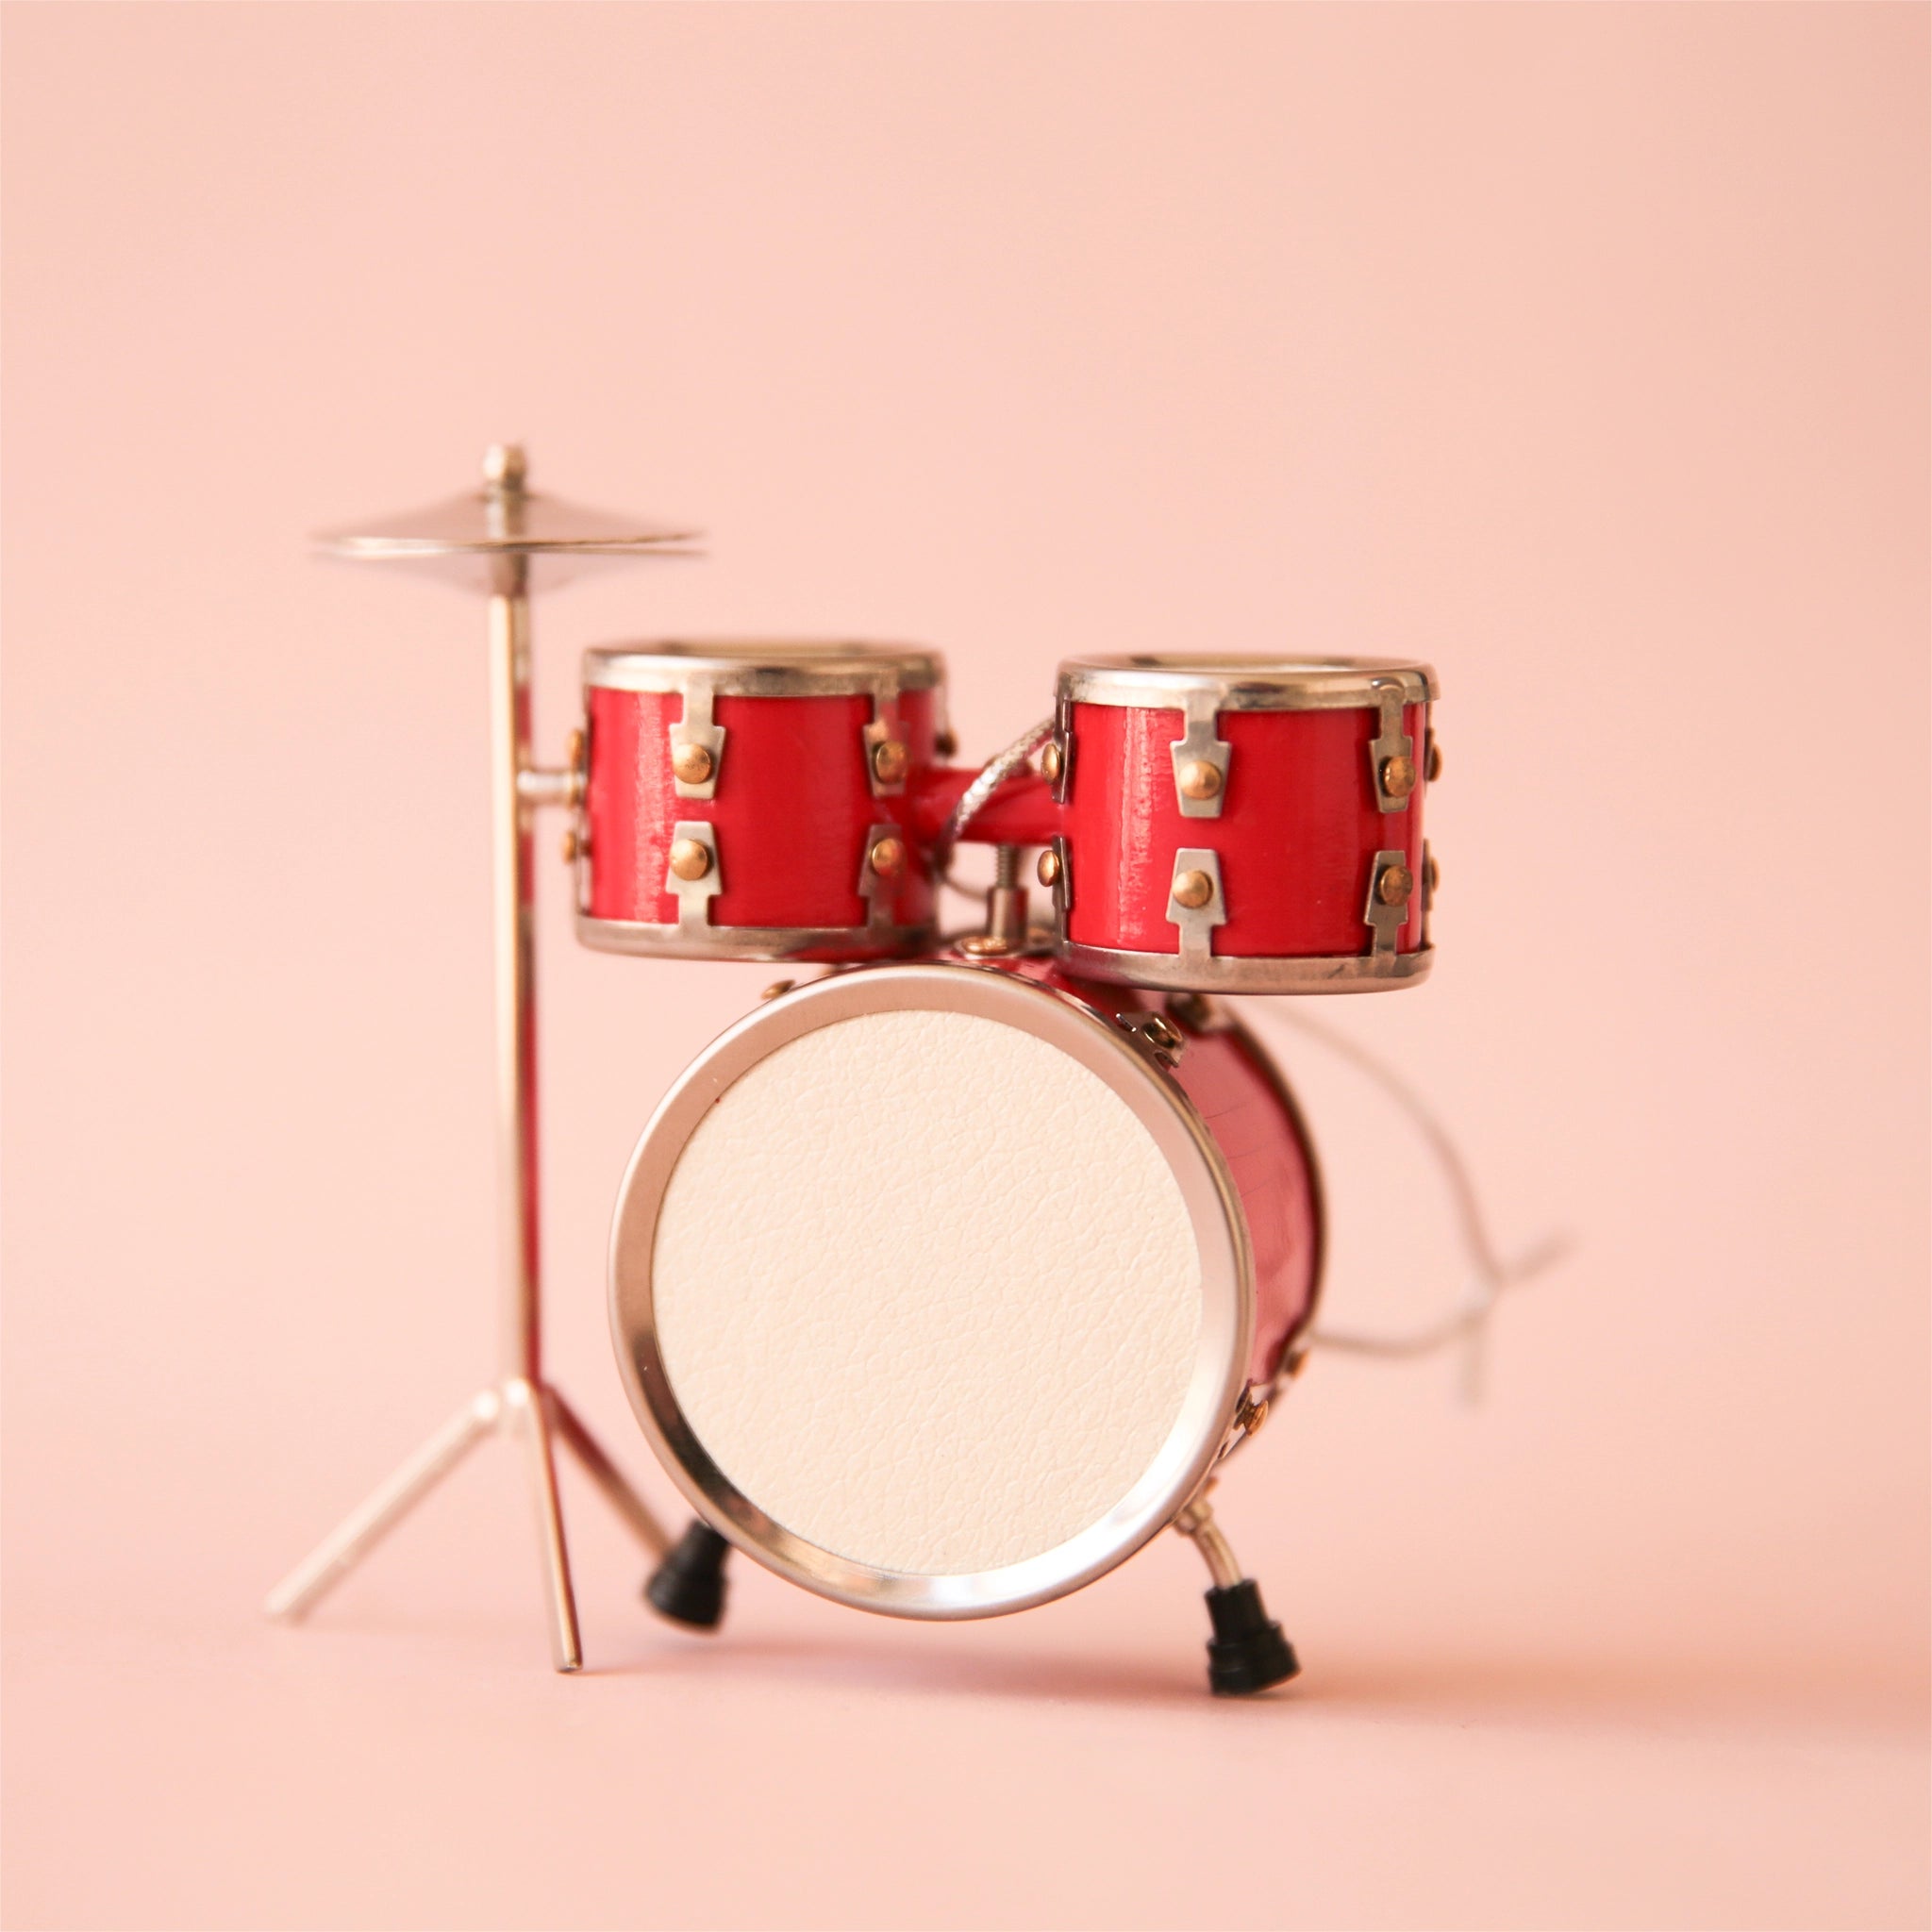 On a pink background is a red drum set shaped ornament. 